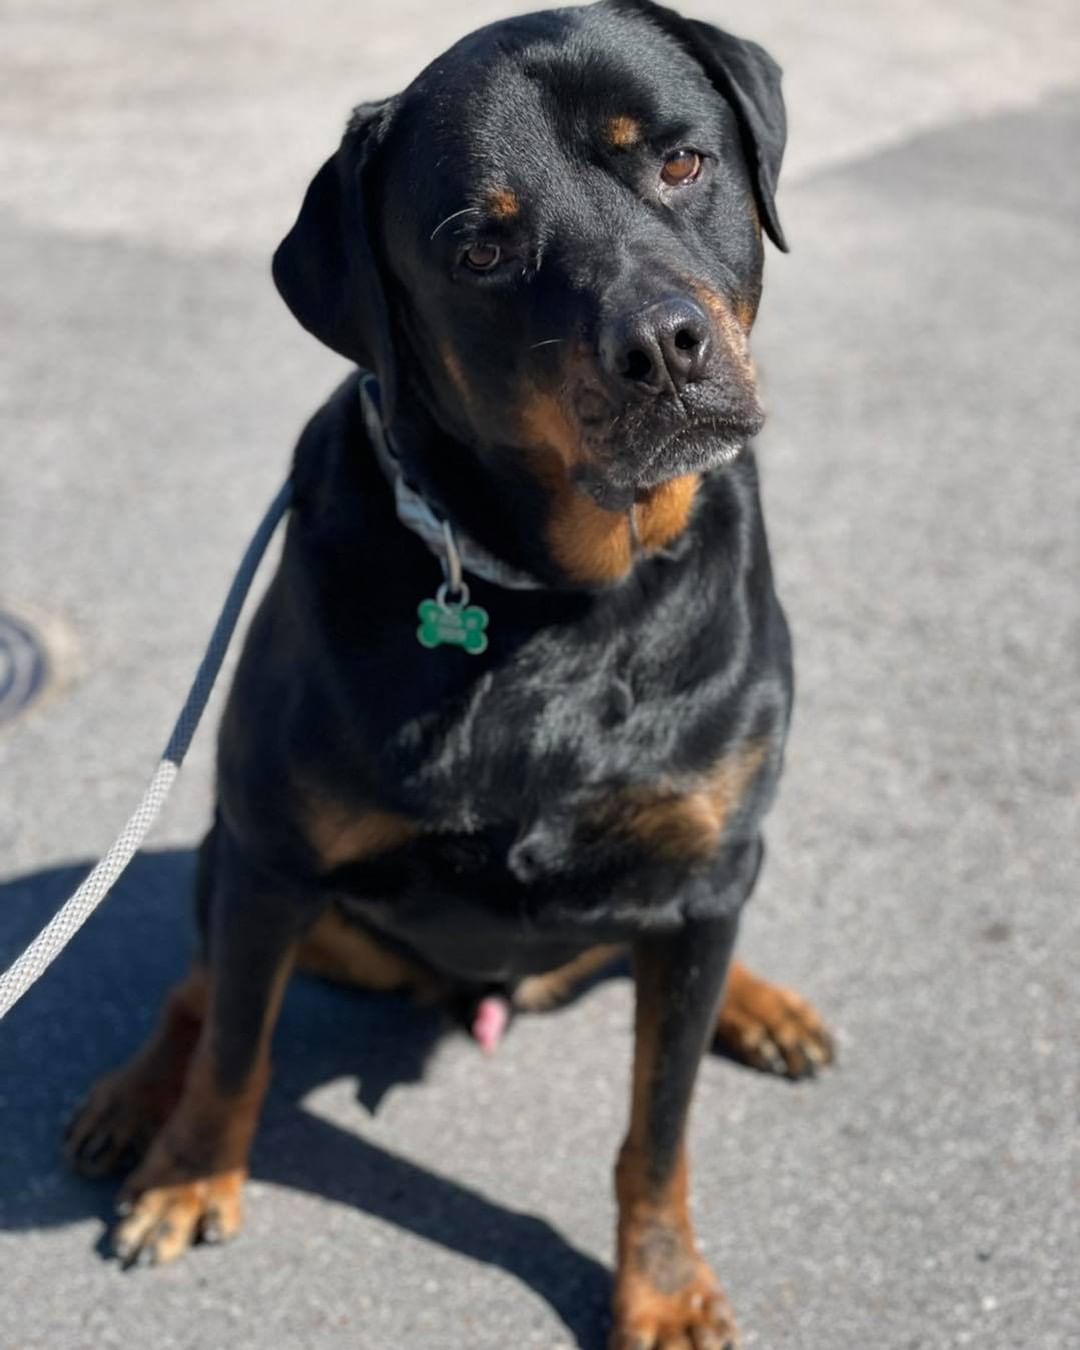 Our gentle giant Hobbs wants to know where you are this beautiful Saturday and why you are not here at Scout’s Honor Rescue’s adoption event meeting the amazing dogs in need of fosters and forever homes?! Come out to Paws Pet Resort until 2 today to meet your new best friend!